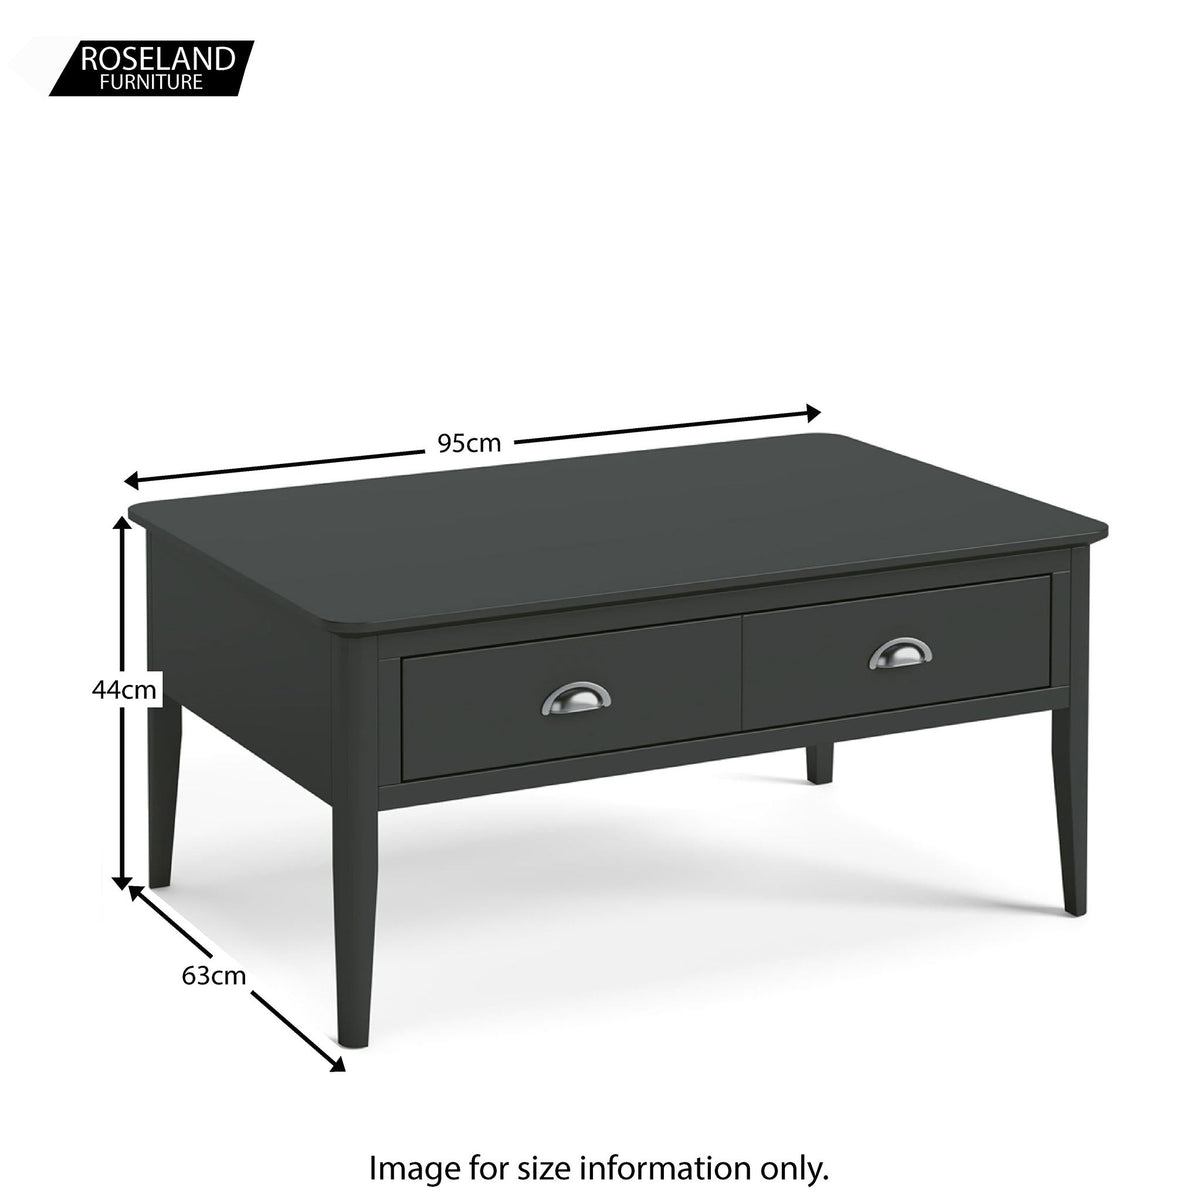 Dumbarton Charcoal Coffee Table - Size Guide